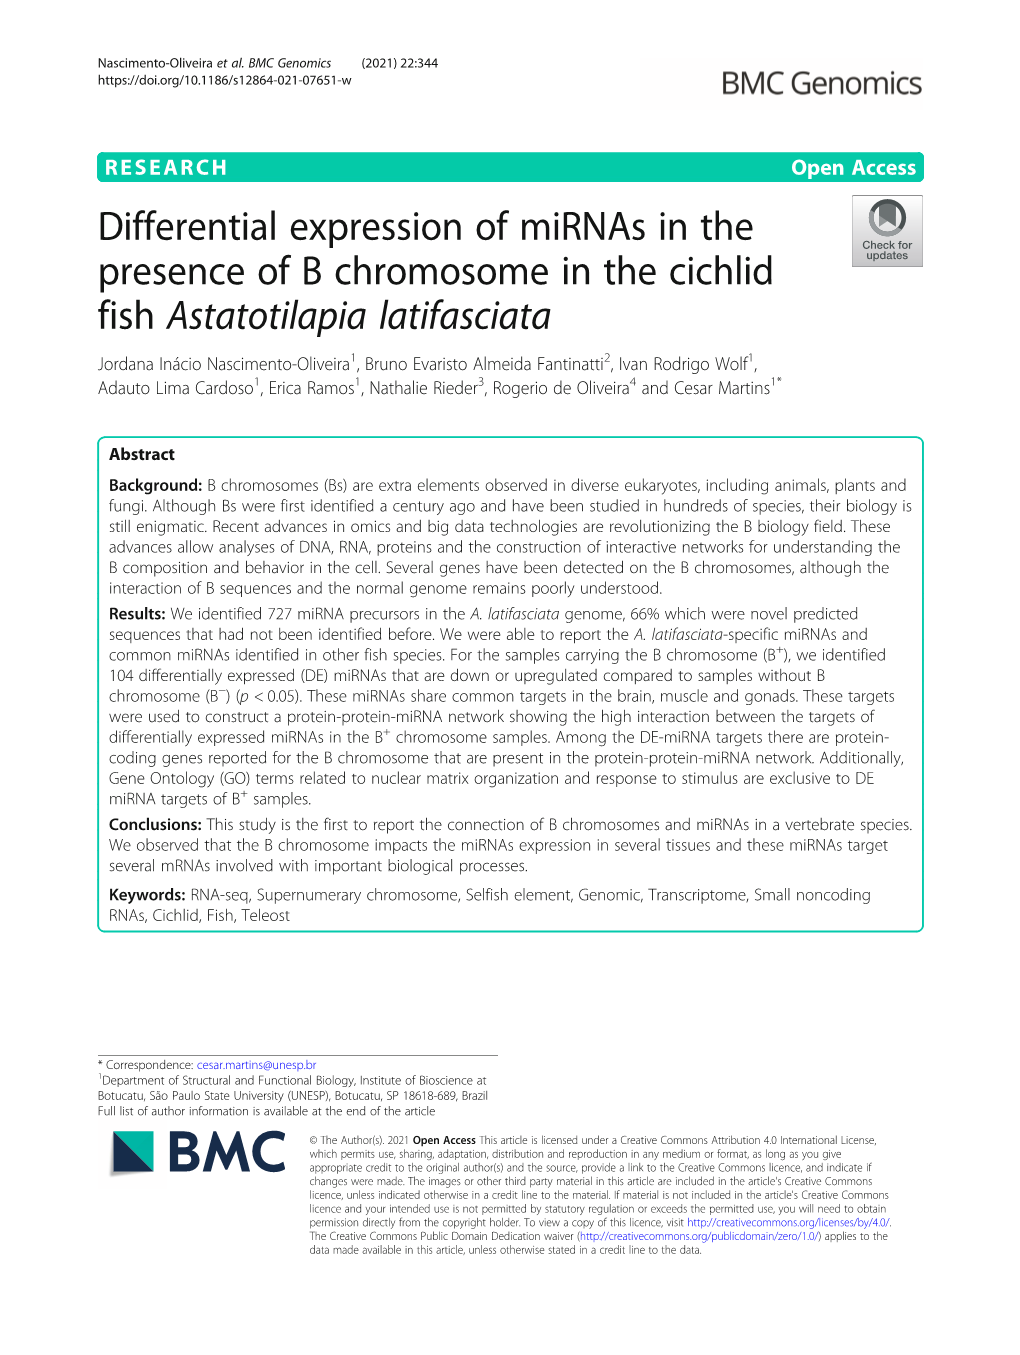 Differential Expression of Mirnas in the Presence of B Chromosome In